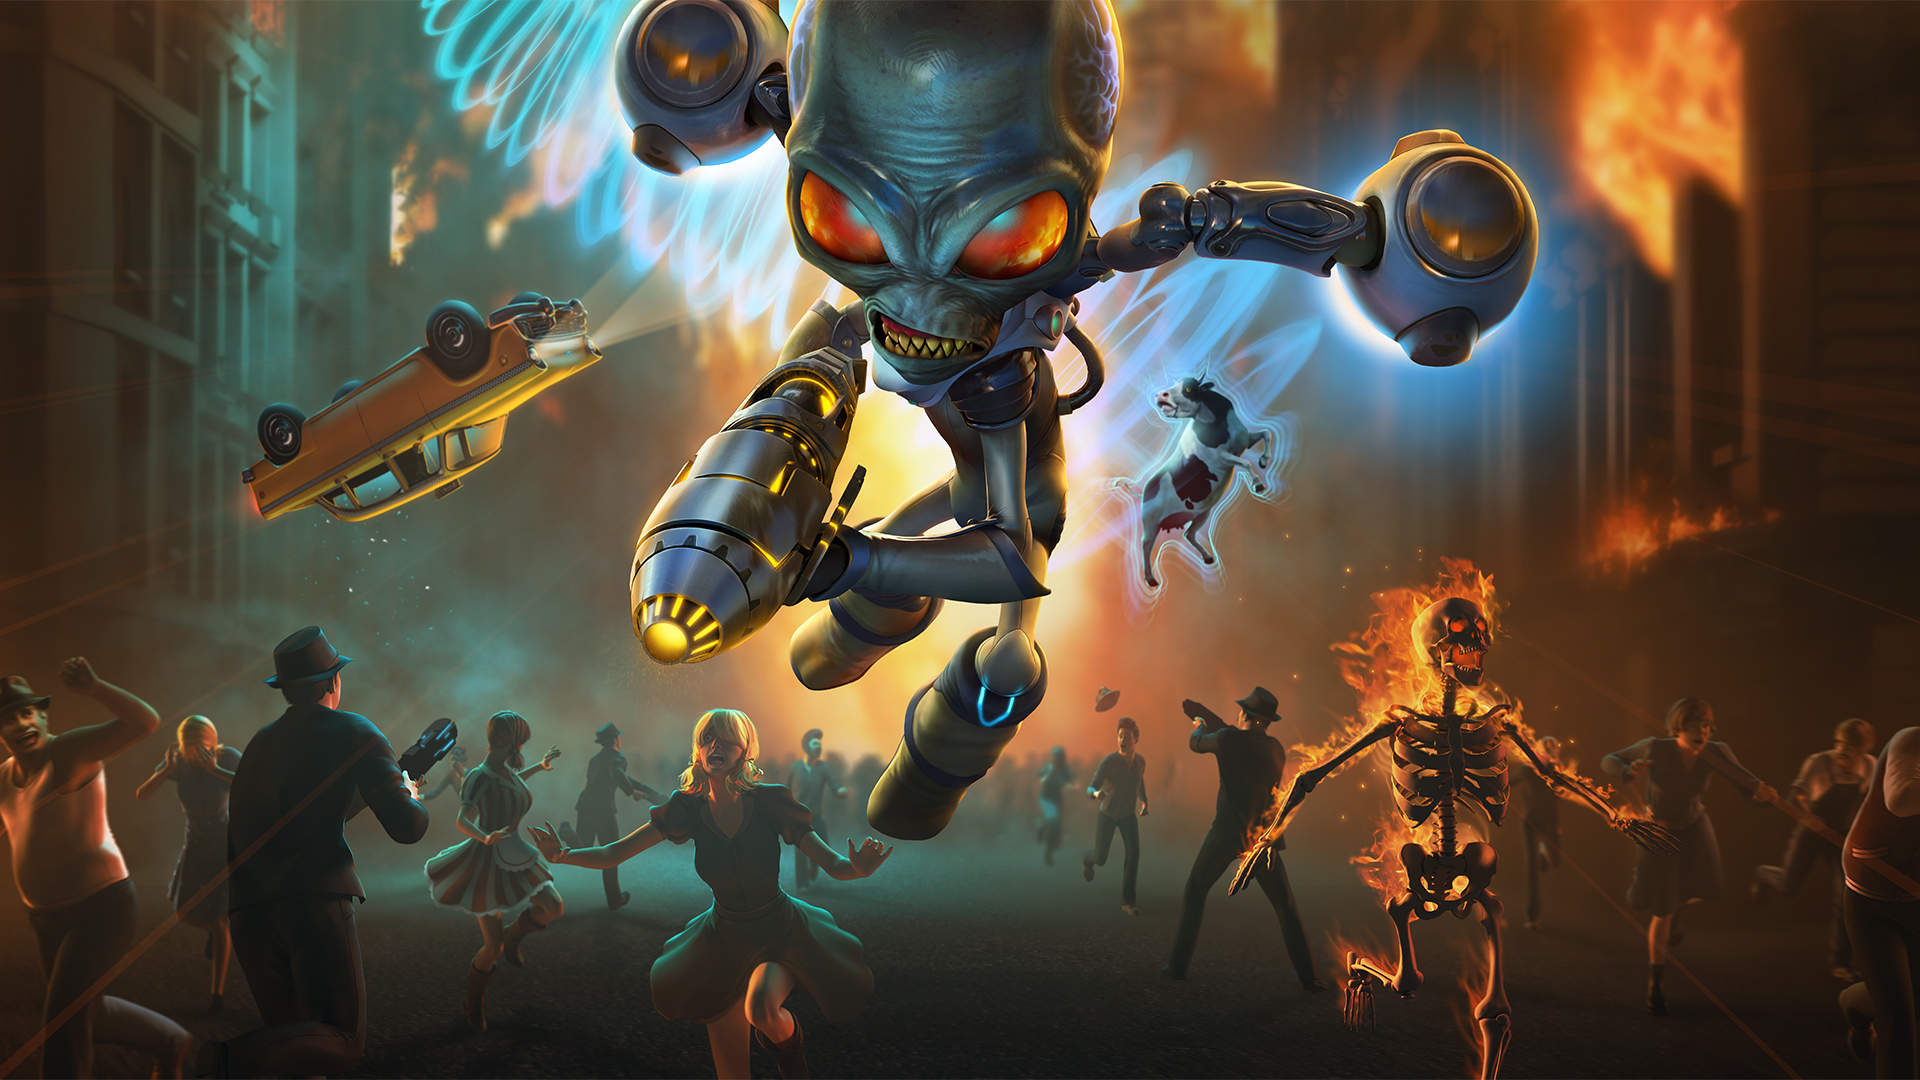 Destroy All Humans! remake gets a release date